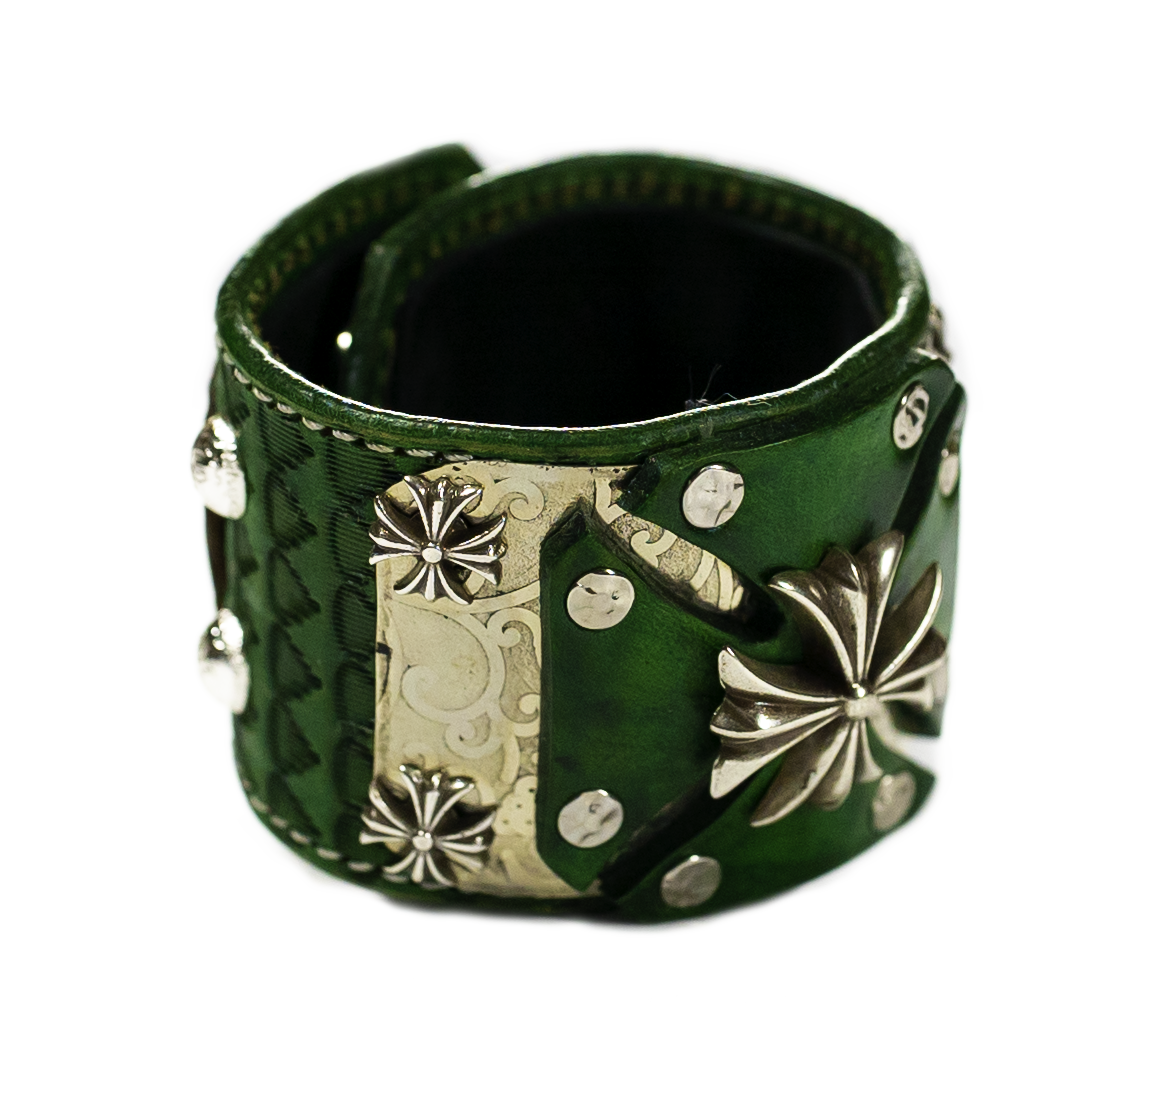 Sir Charles - Green on Green Leather Bracelet top view